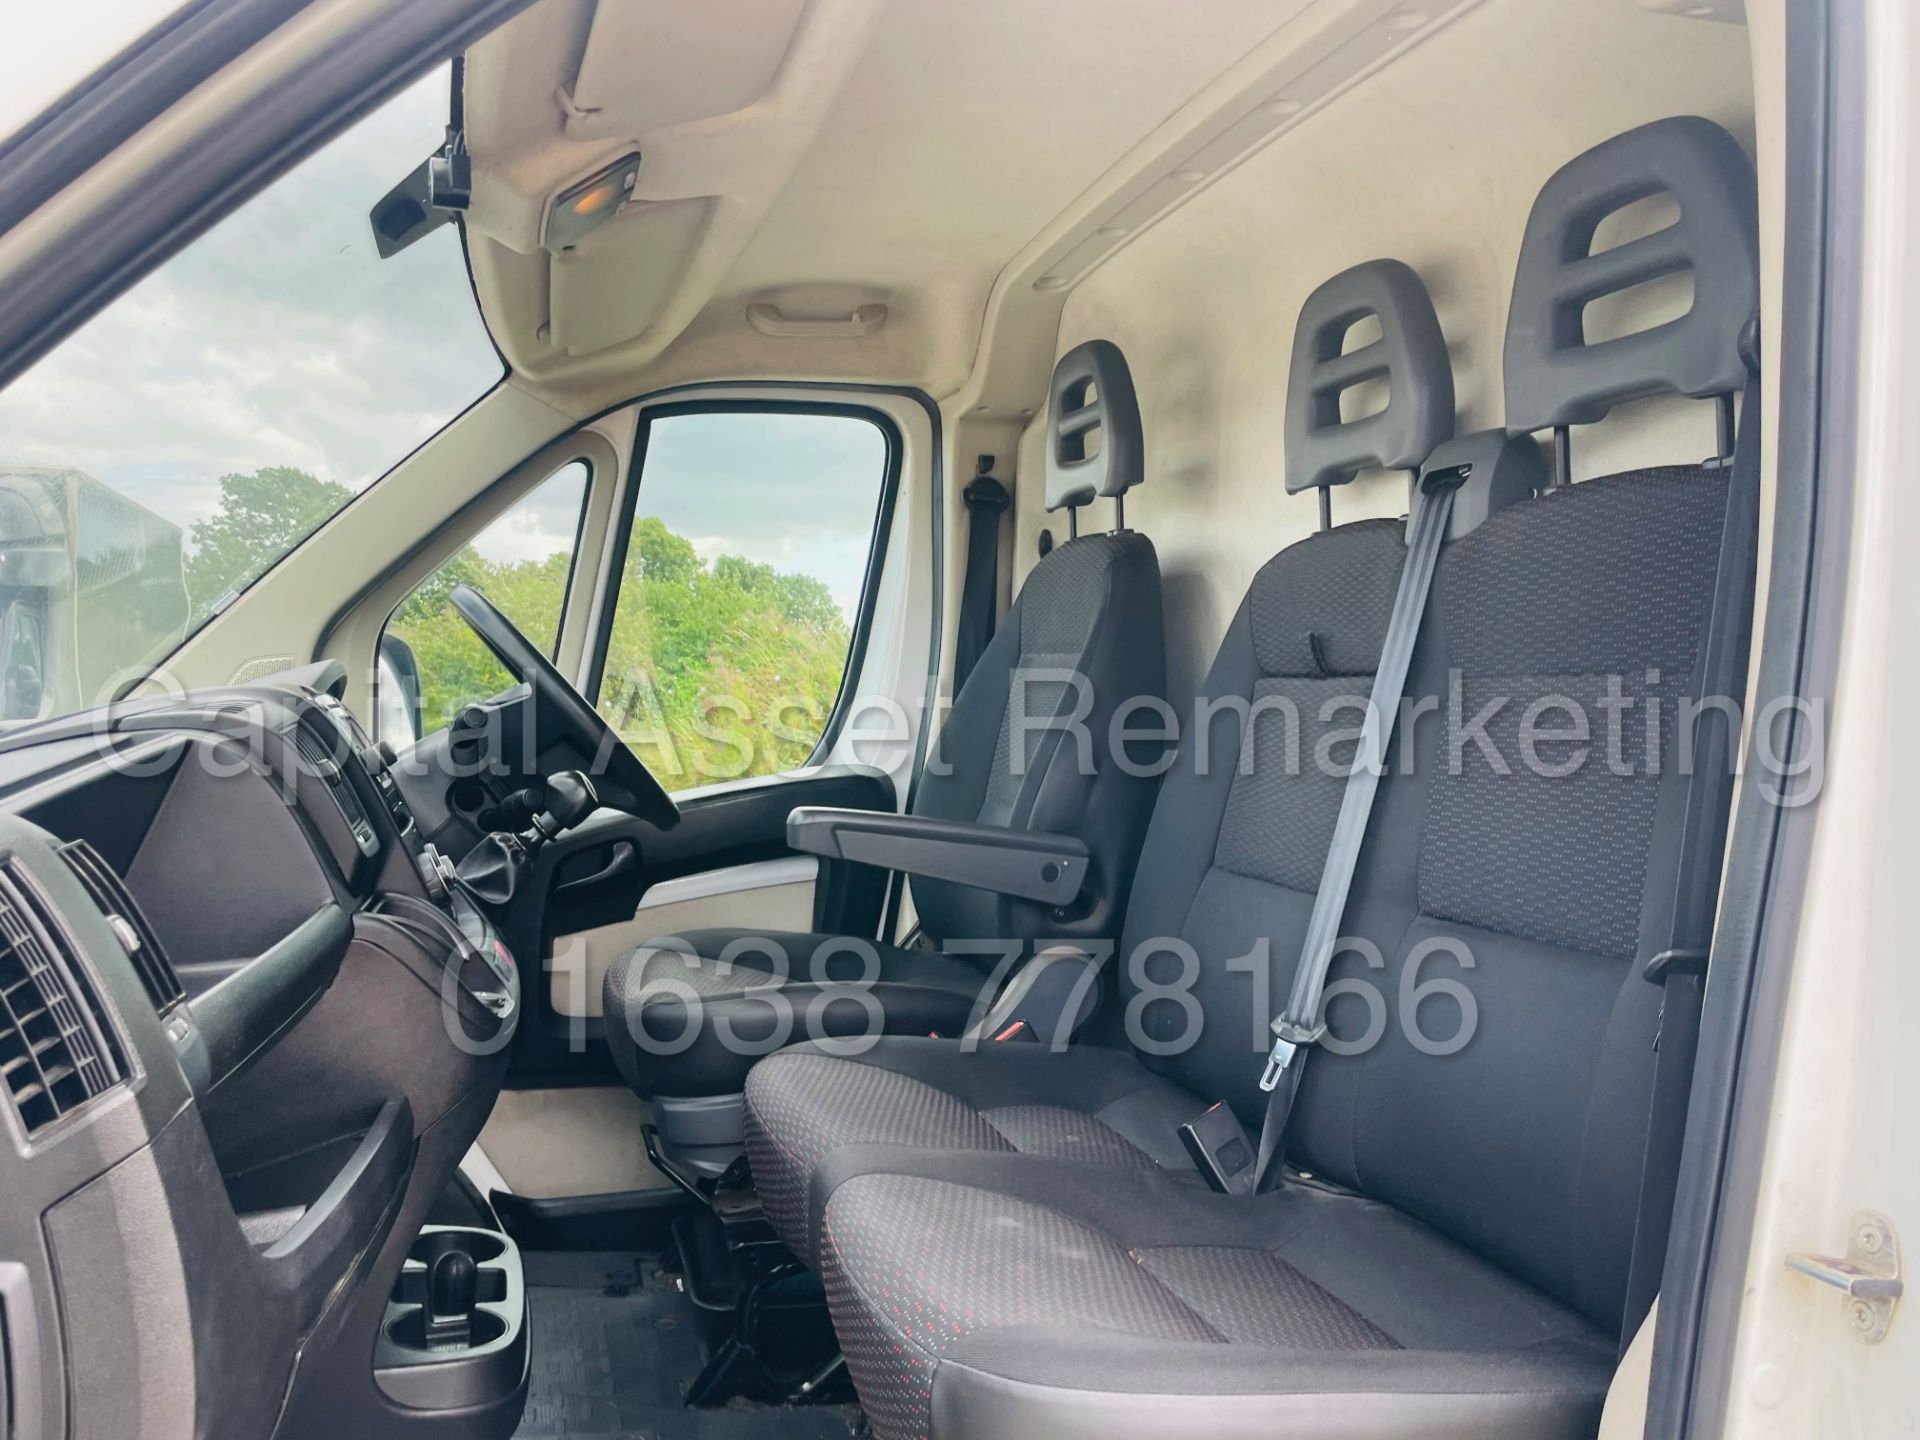 ON SALE PEUGEOT BOXER *PROFESSIONAL* LWB HI-ROOF (2018 - EURO 6) '2.0 BLUE HDI - 6 SPEED' *A/C & NAV - Image 22 of 44